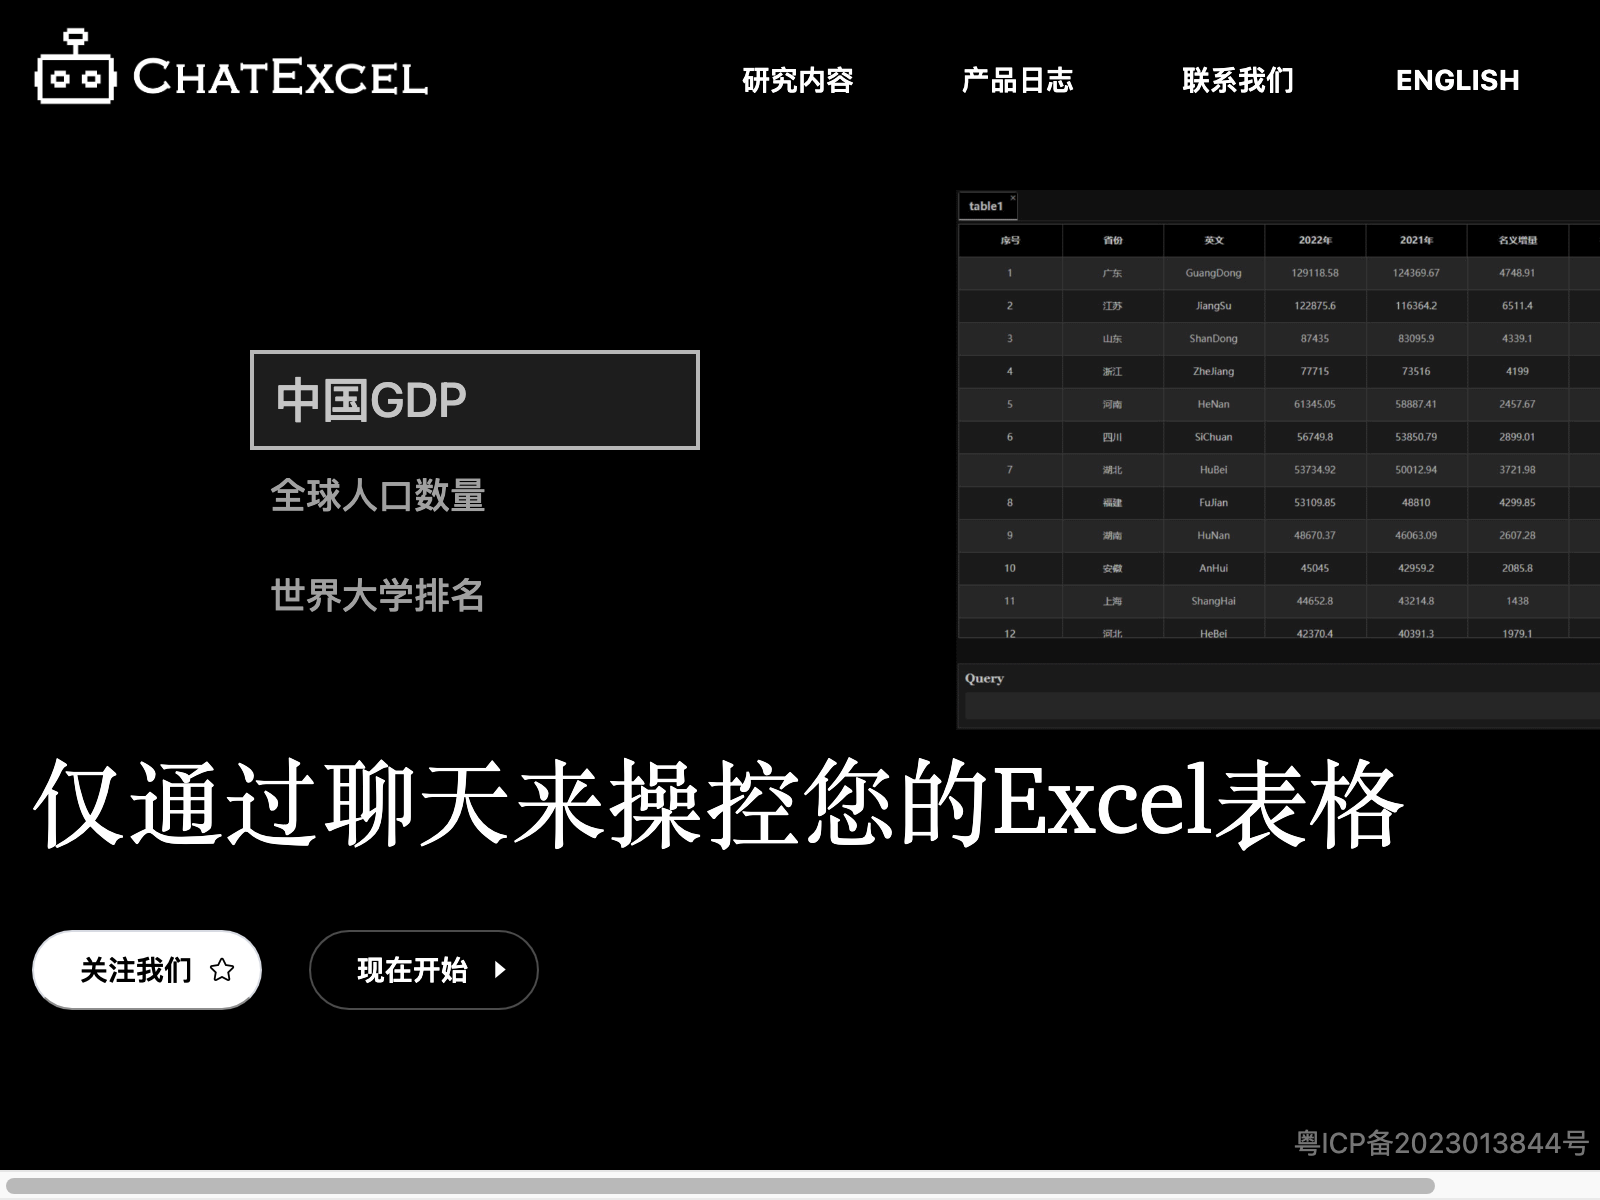 Chatexcel preview